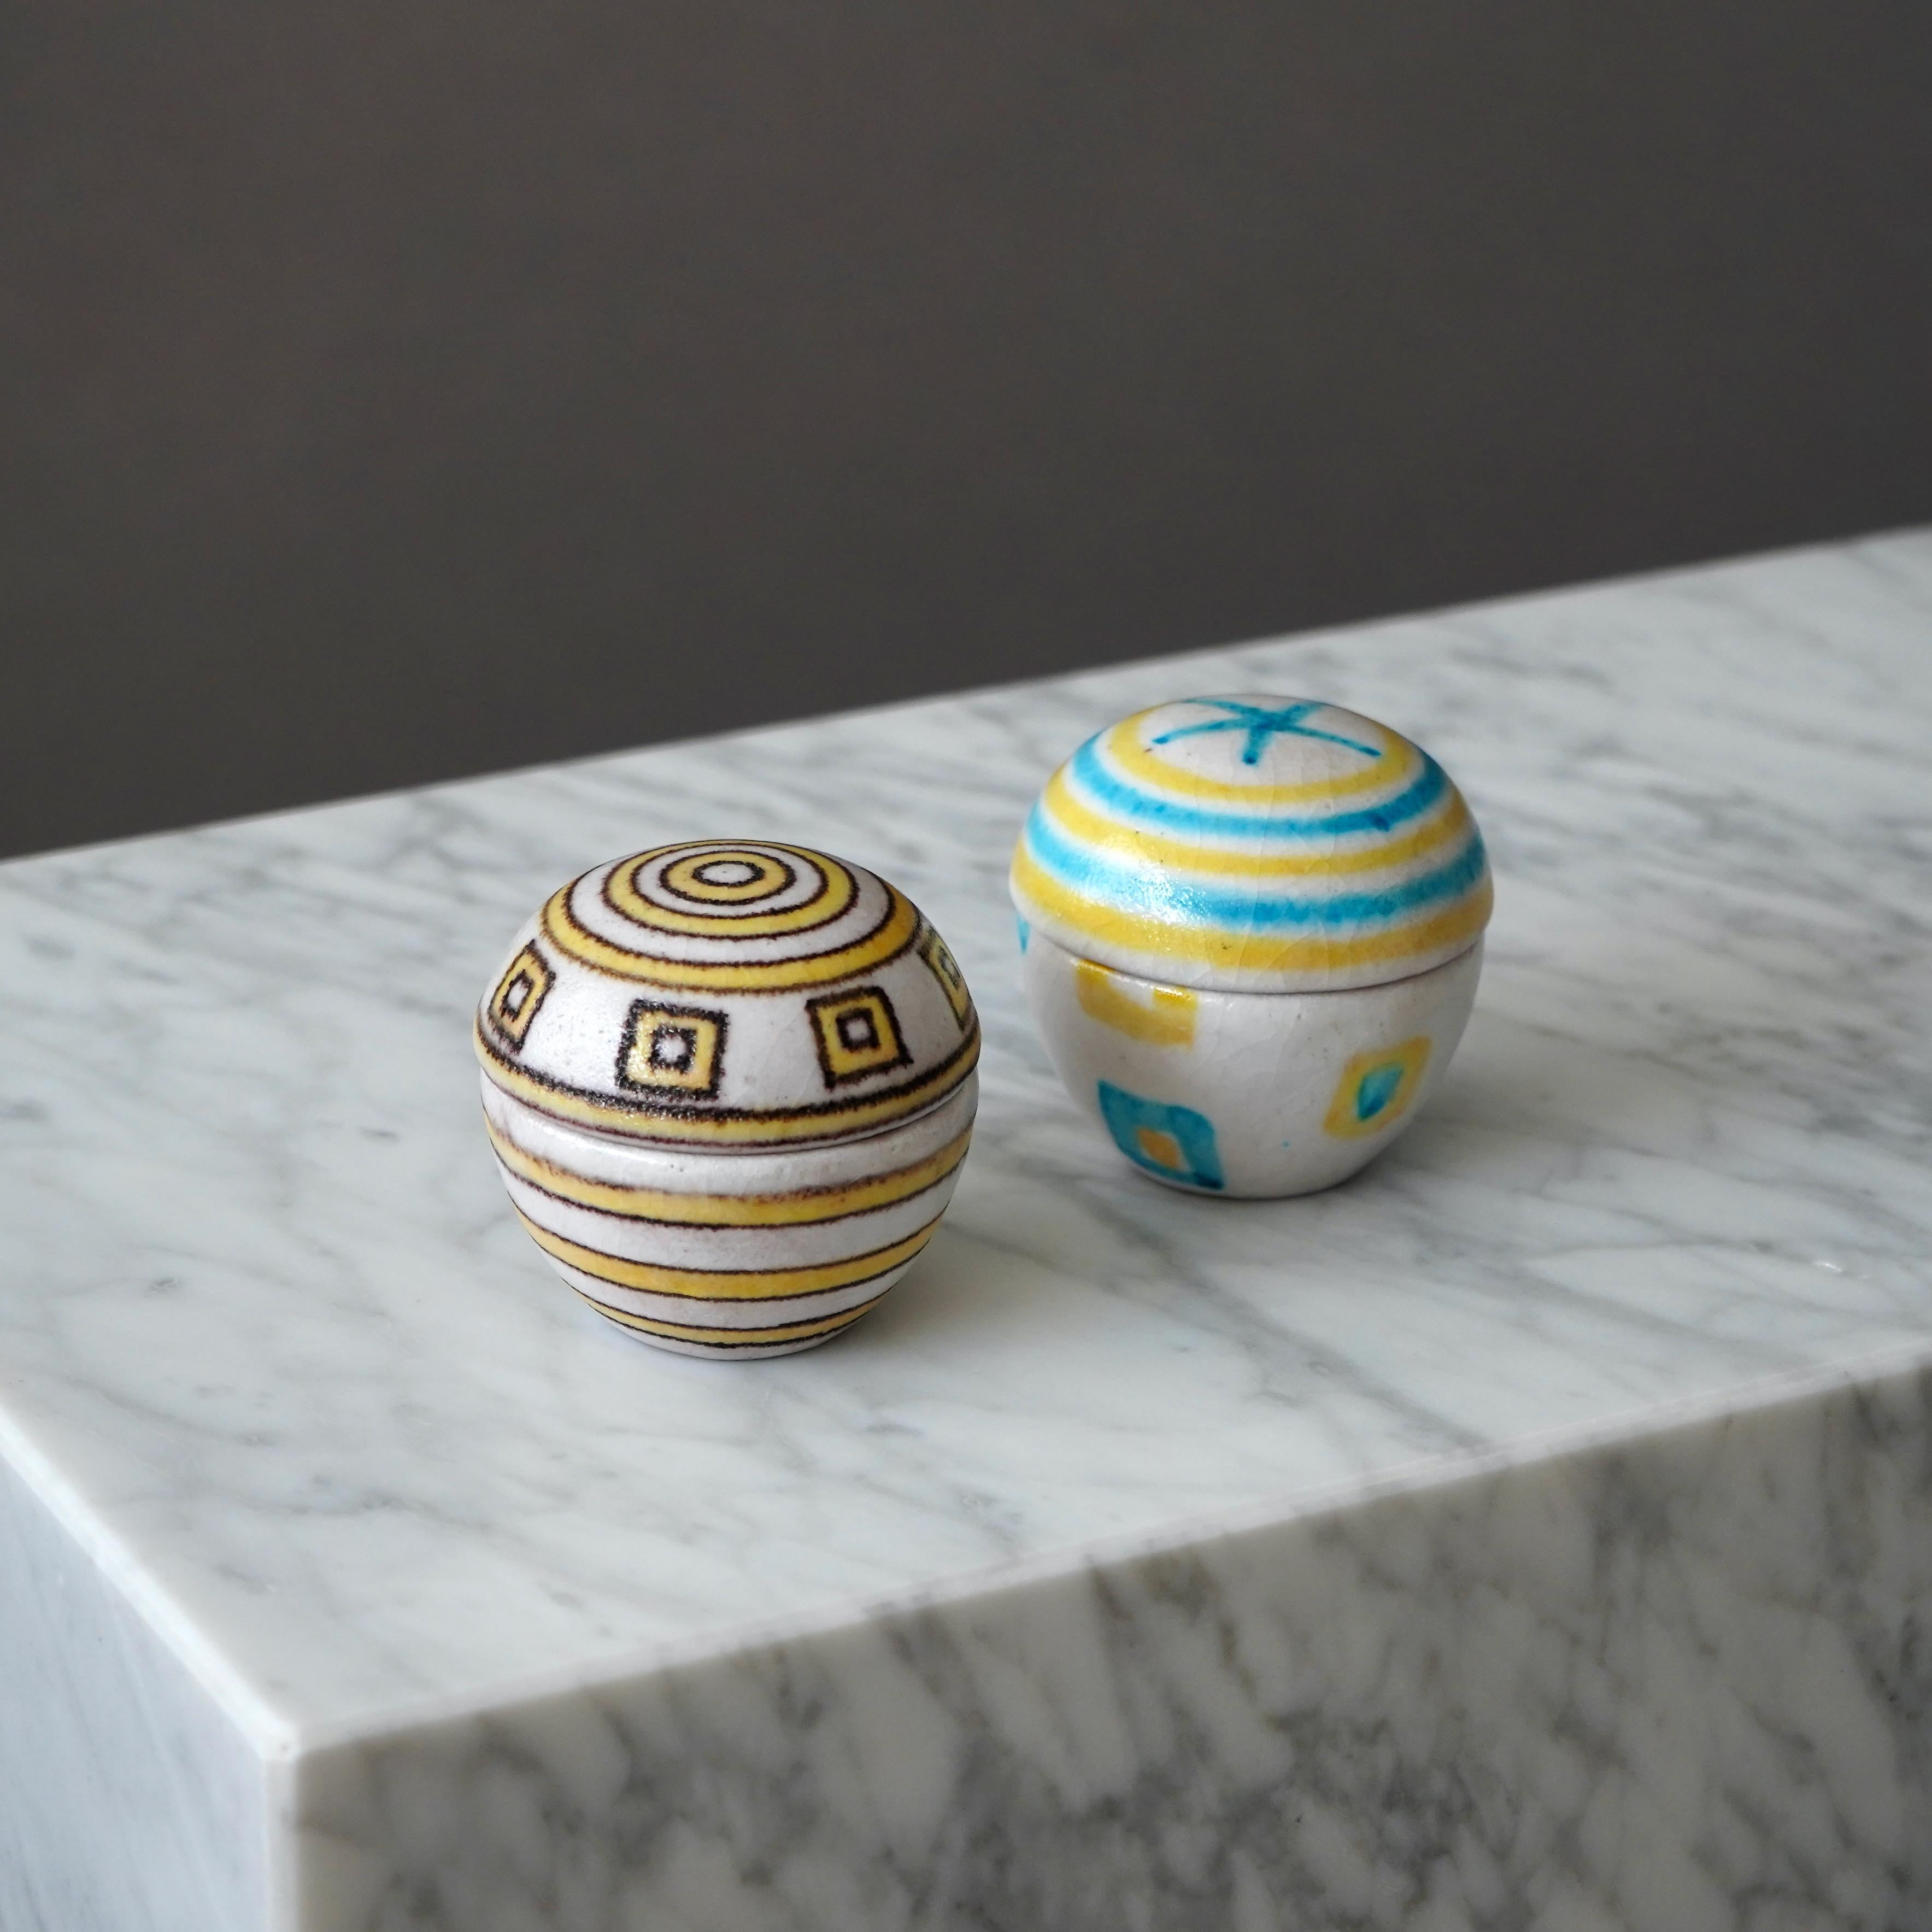 Two beautiful and unique lidded boxes with amazing lava-like glaze.
Made by Guido Gambone in Florence, Italy, 1950s.

The box with brown and yellow glaze is in excellent condition. But the box with blue and yellow glaze has a hairline crack.

Marked